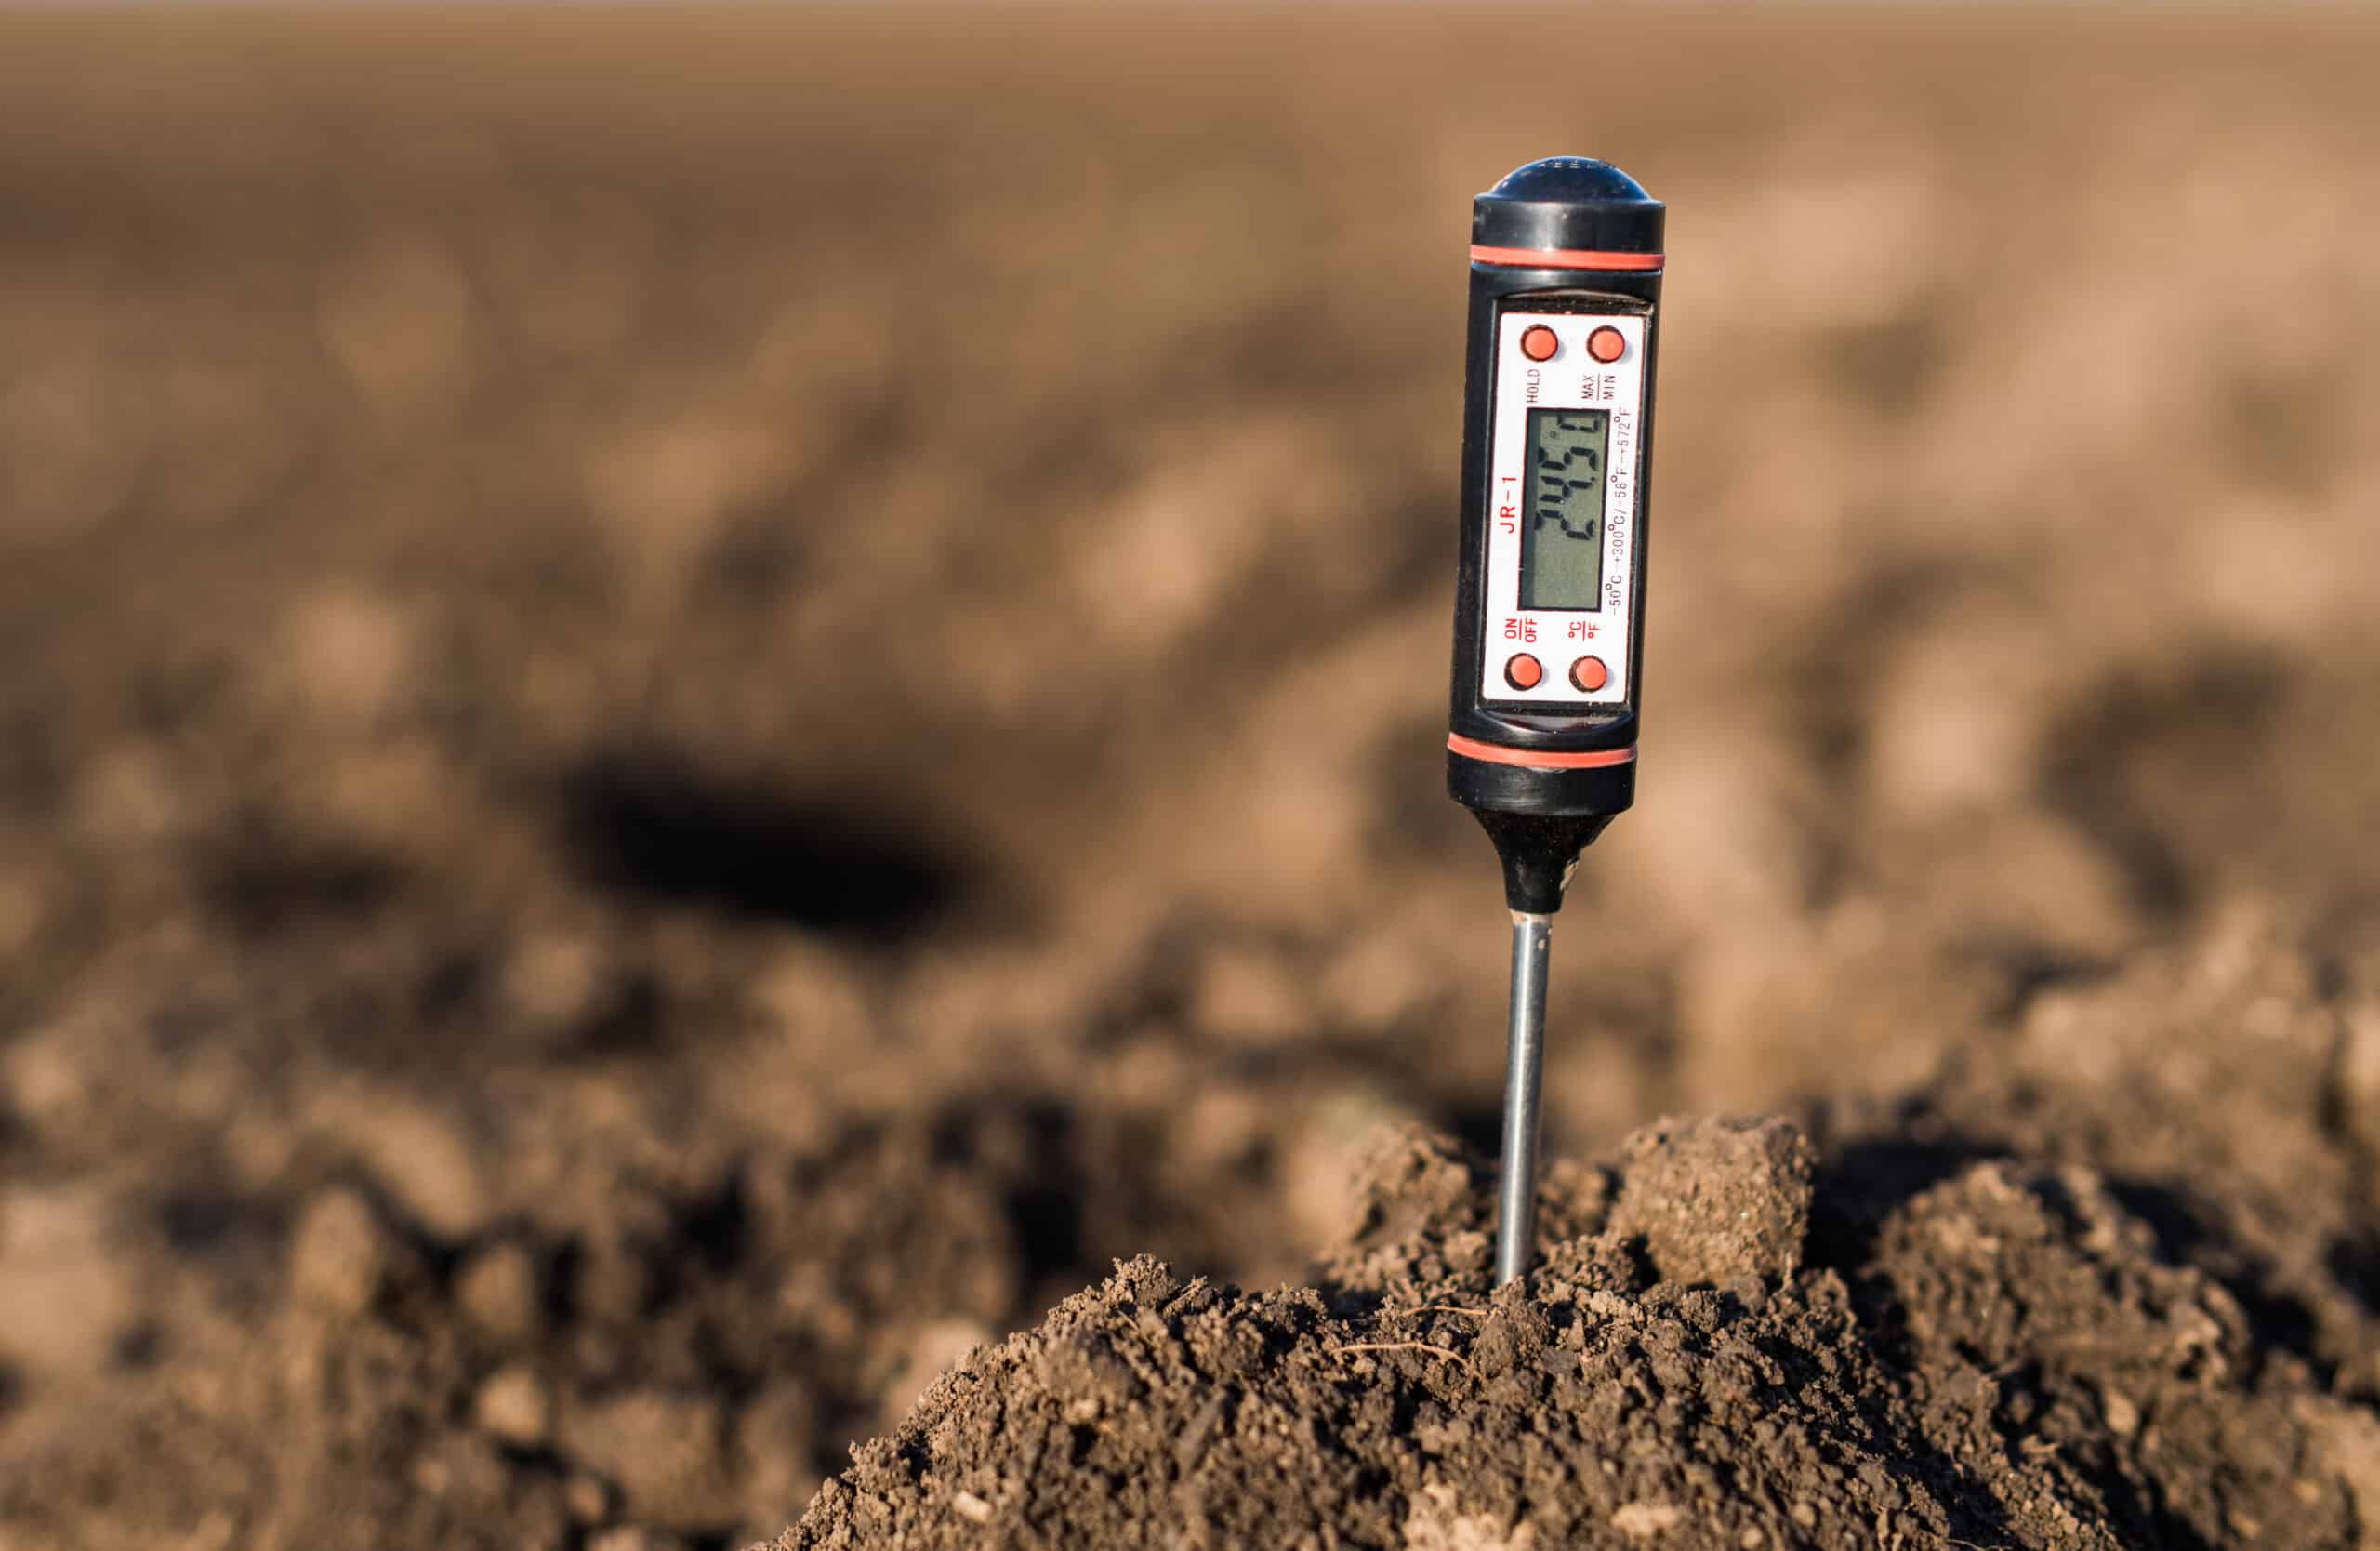 cannabis cultivation technology gives cultivators remote access to data, such as the reading from this IoT soil meter for measuring PH, temperature and moisture